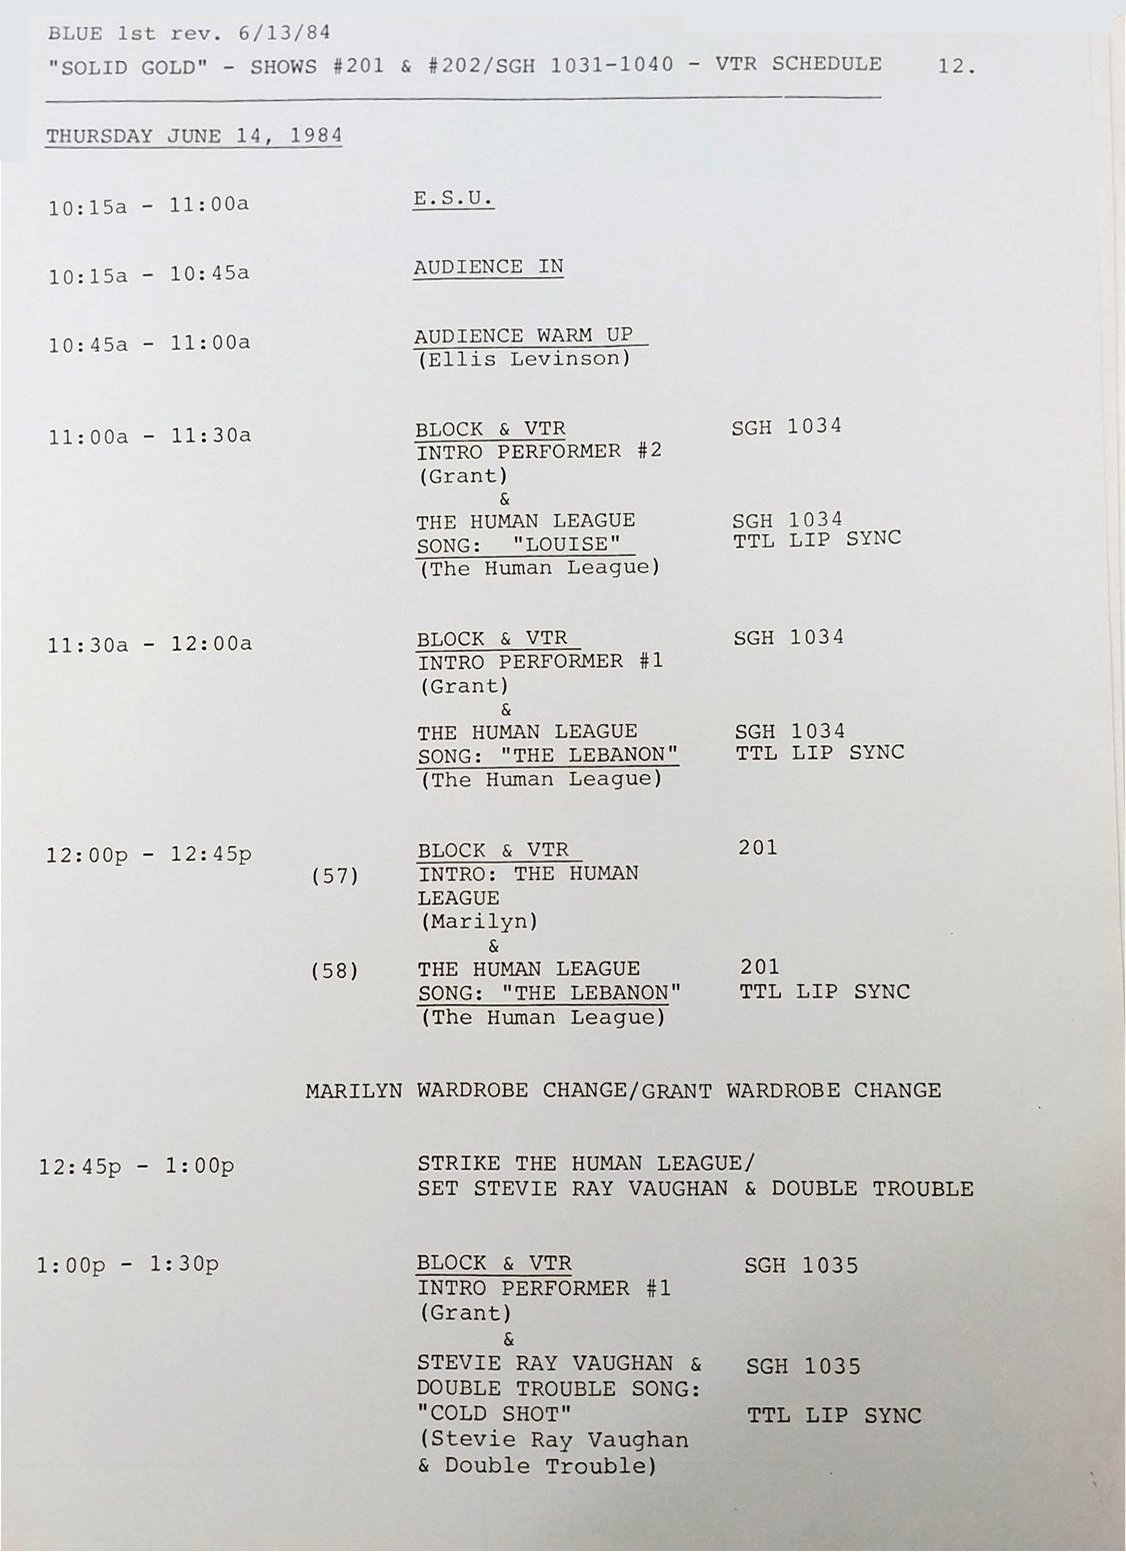 Itinerary for Solid Gold TV Show Recording